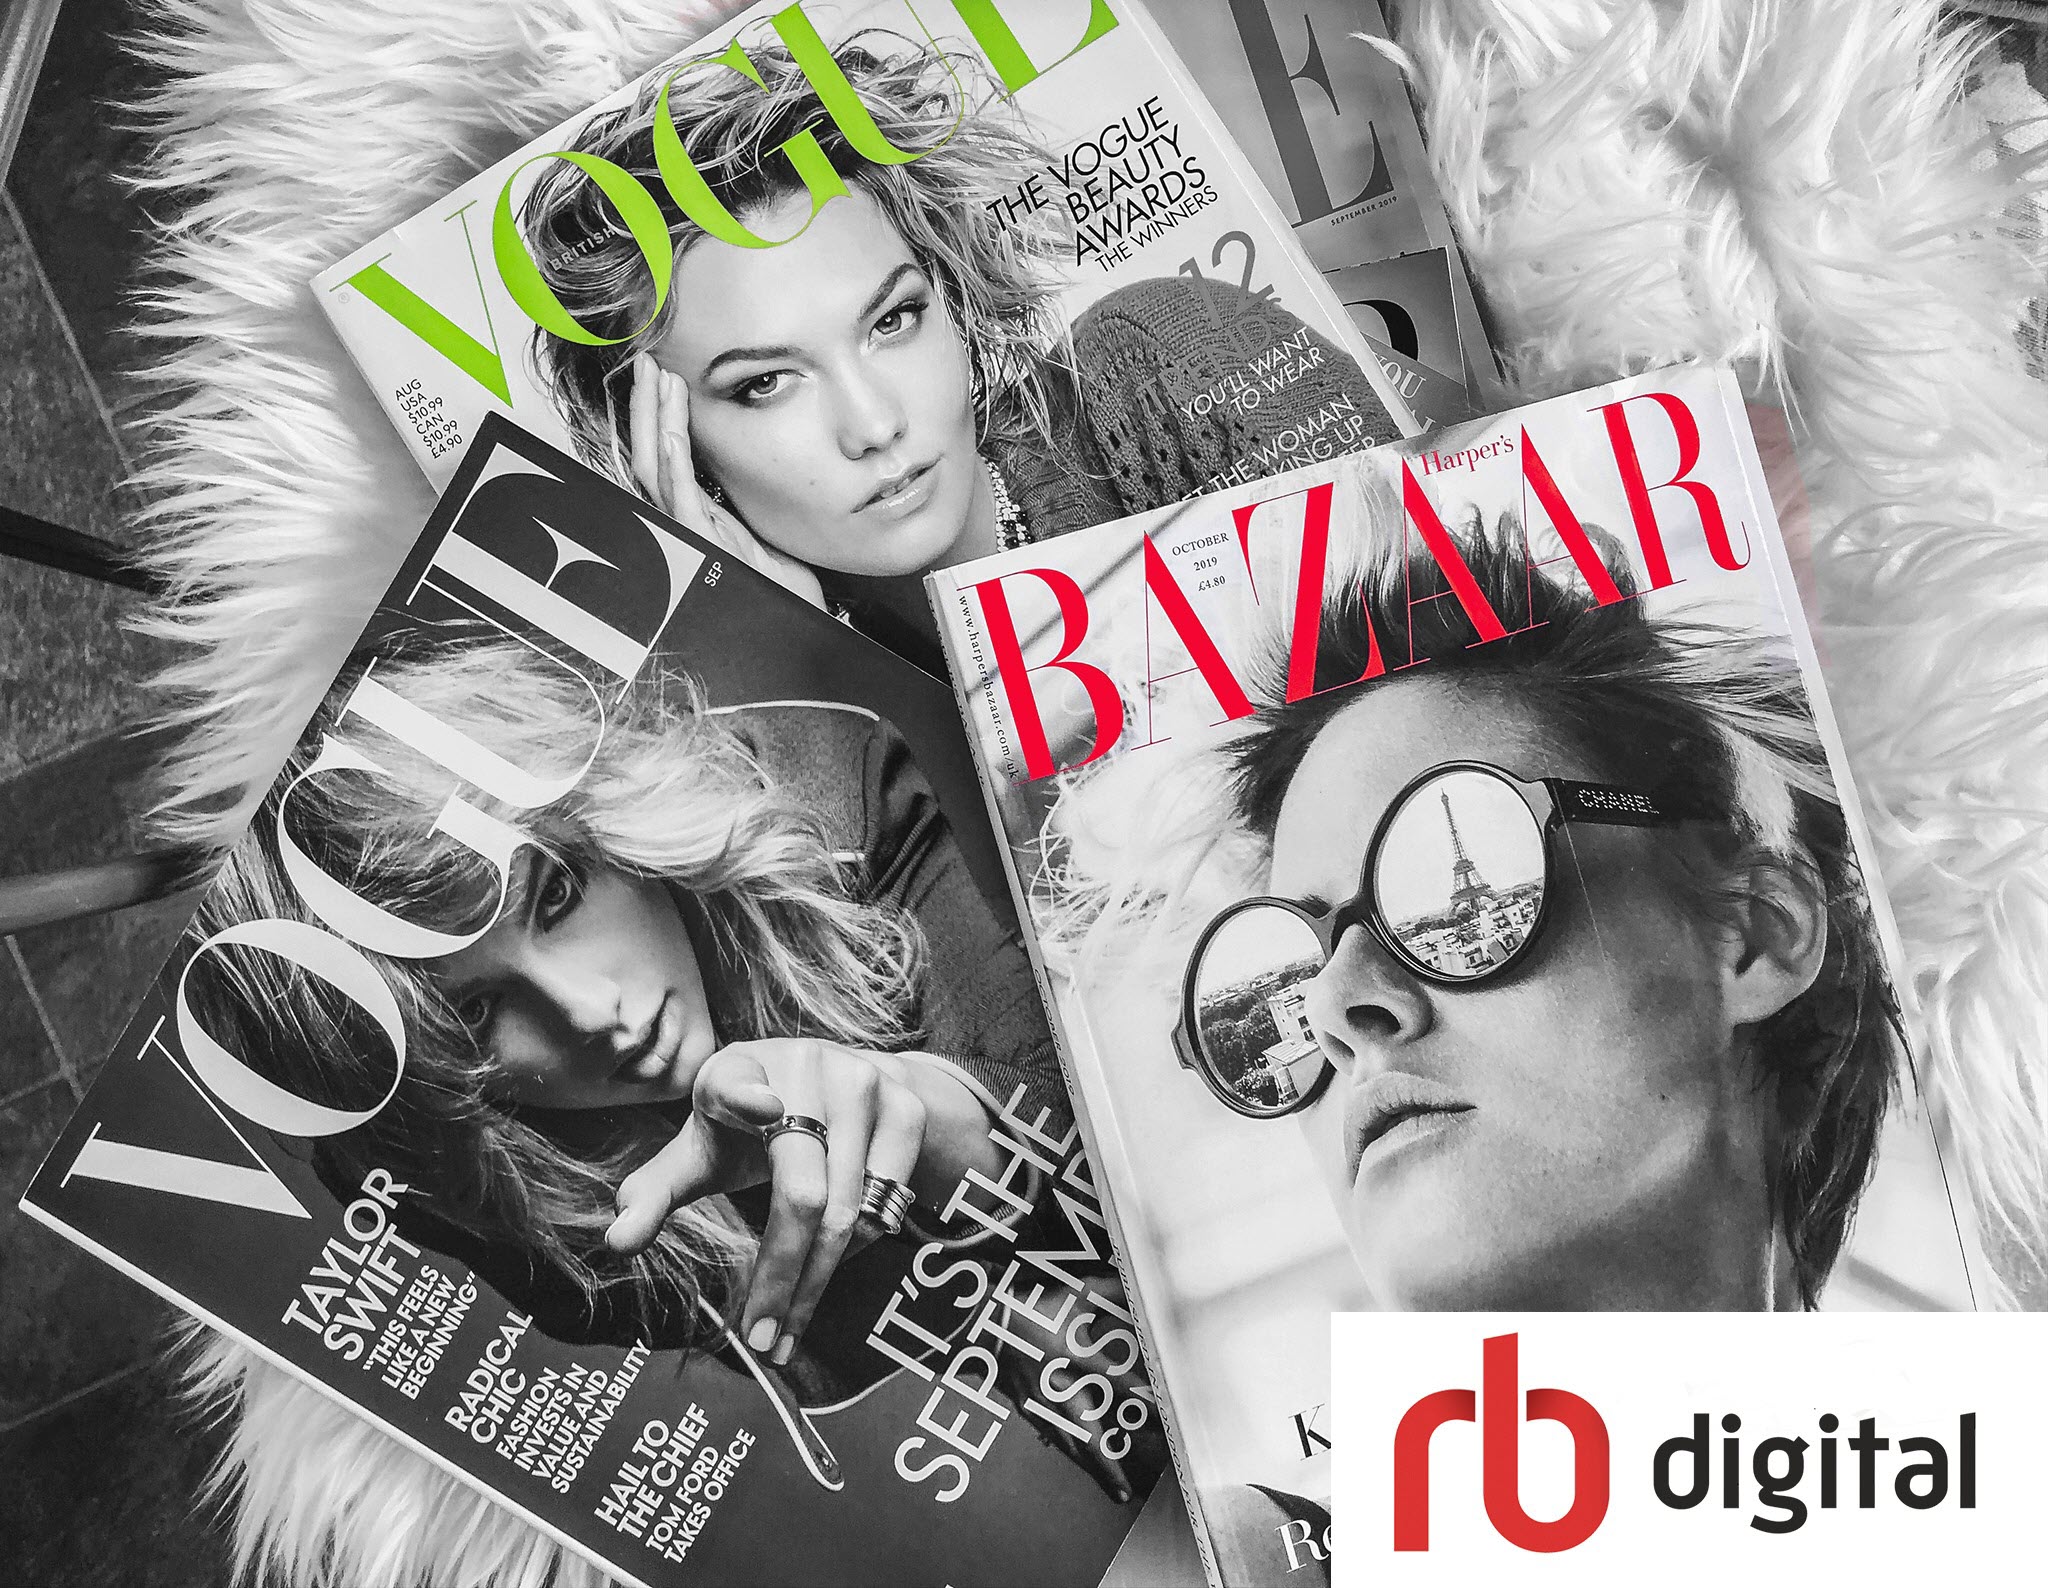 Pile of magazines with RB Digital logo